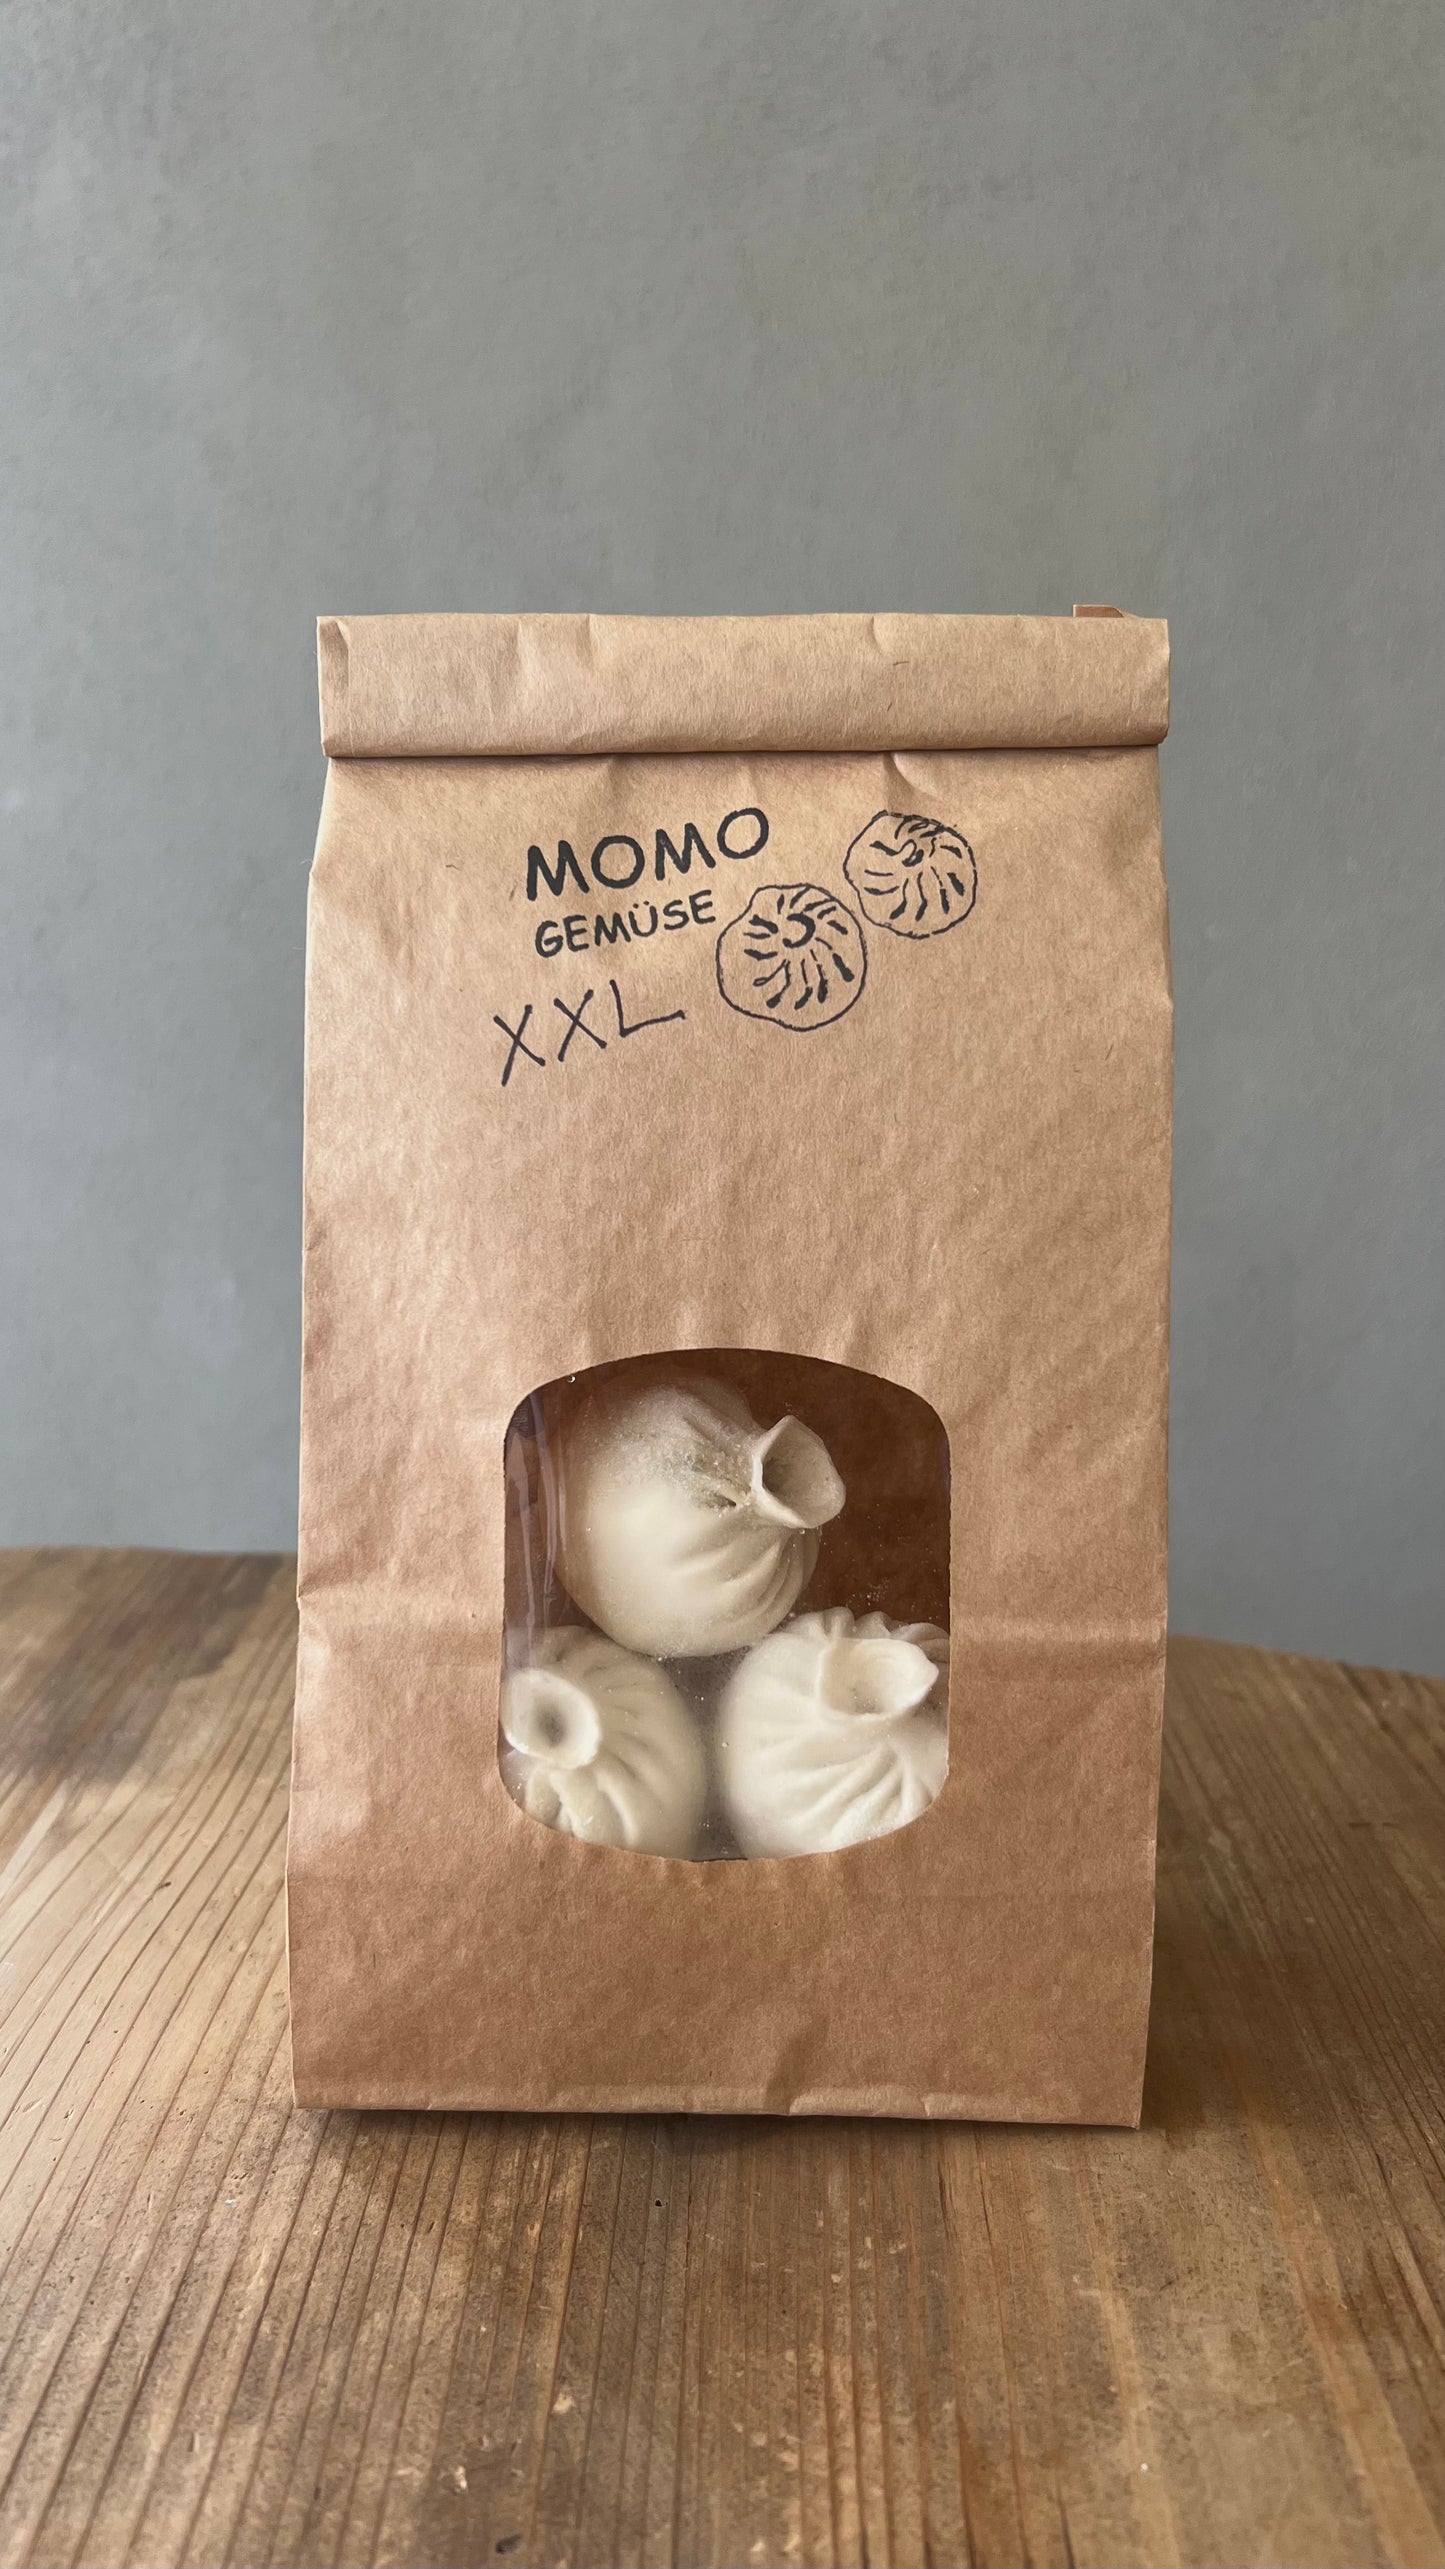 Momo with Vegetables XXL 670g (20 pieces for 3-4 Portions)